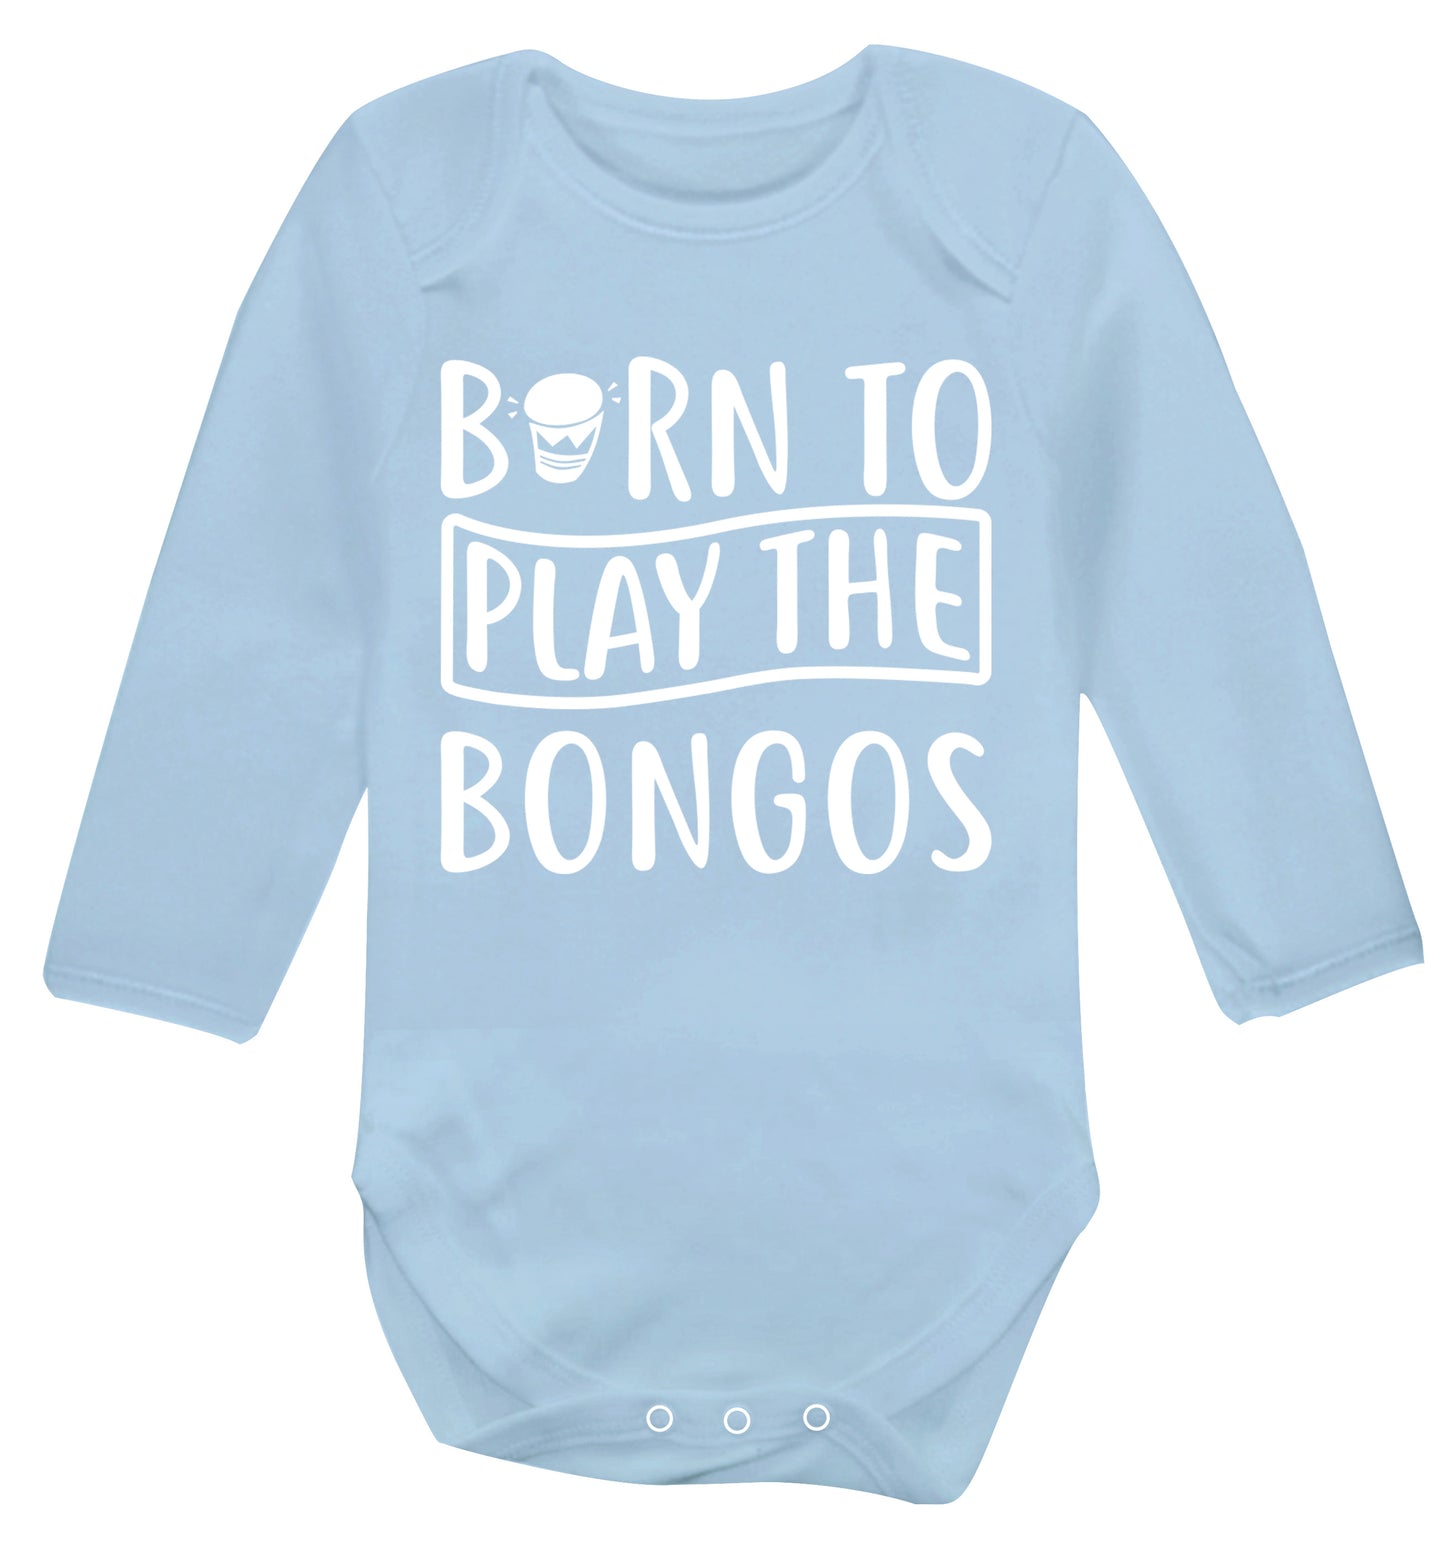 Born to play the bongos Baby Vest long sleeved pale blue 6-12 months